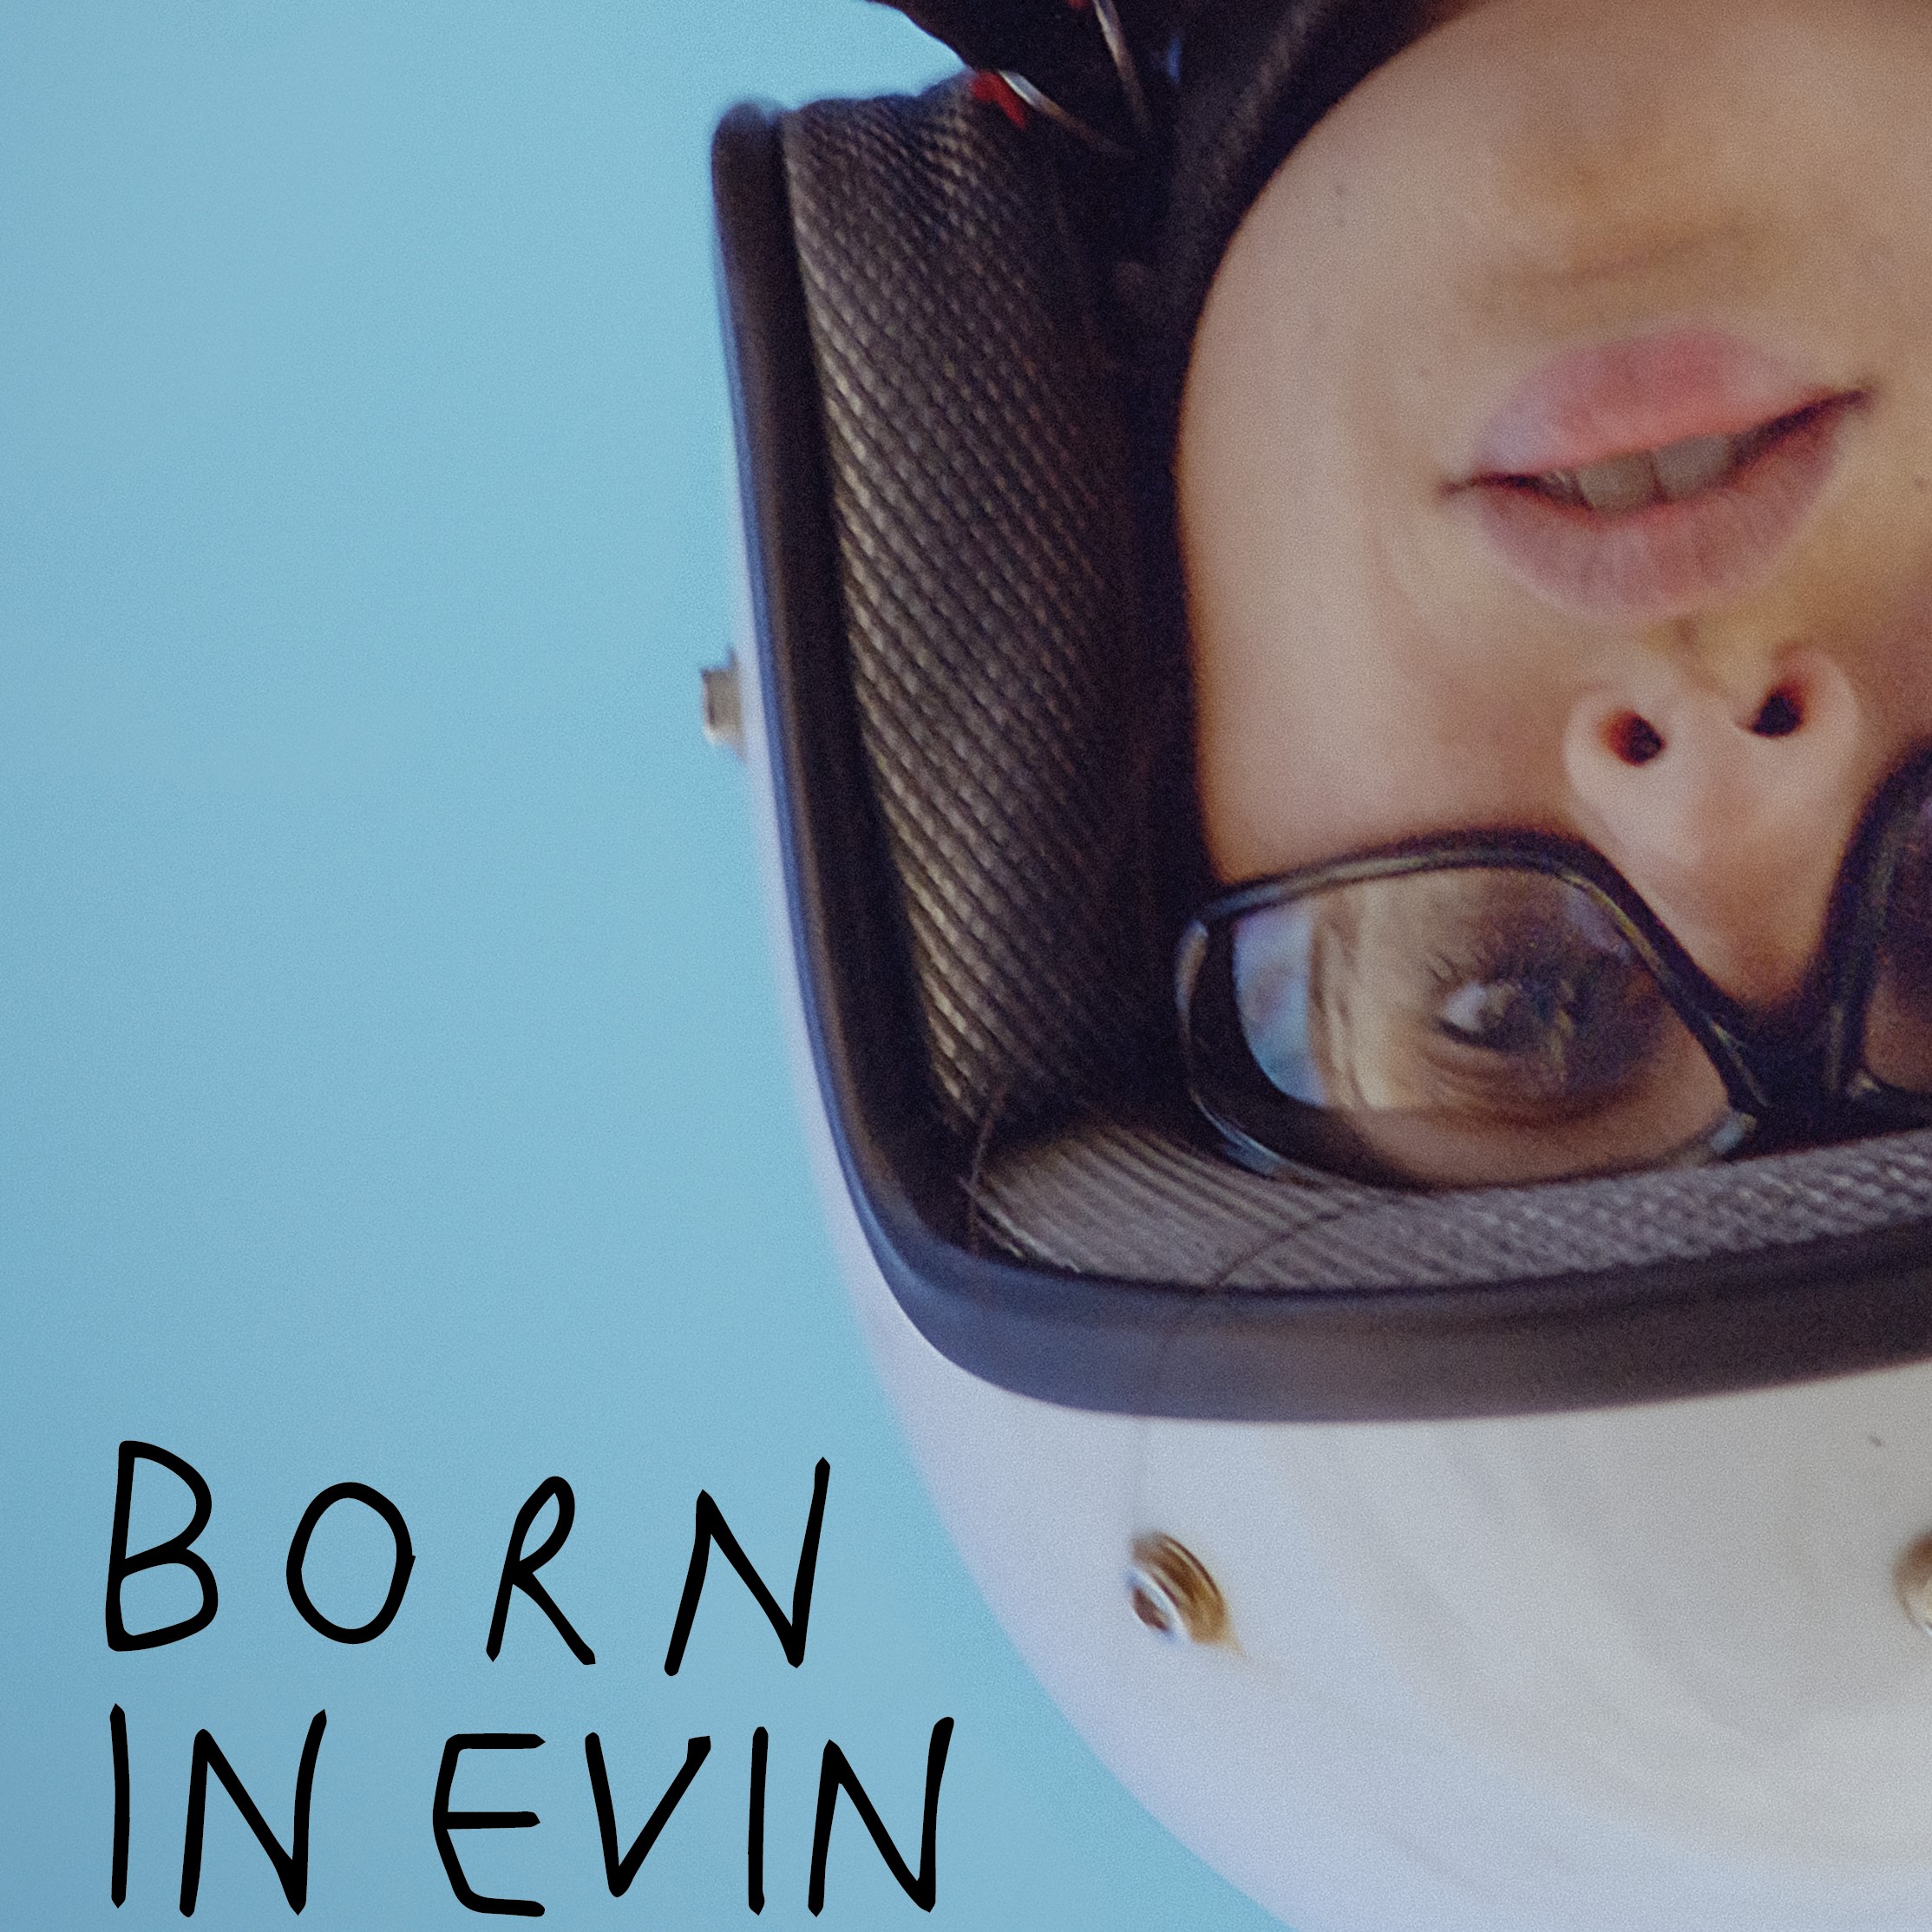 Maryam Zaree's 2019 film 'Born in Evin' tells the story of children like her who were born to mothers detained at Iran's Evin Prison